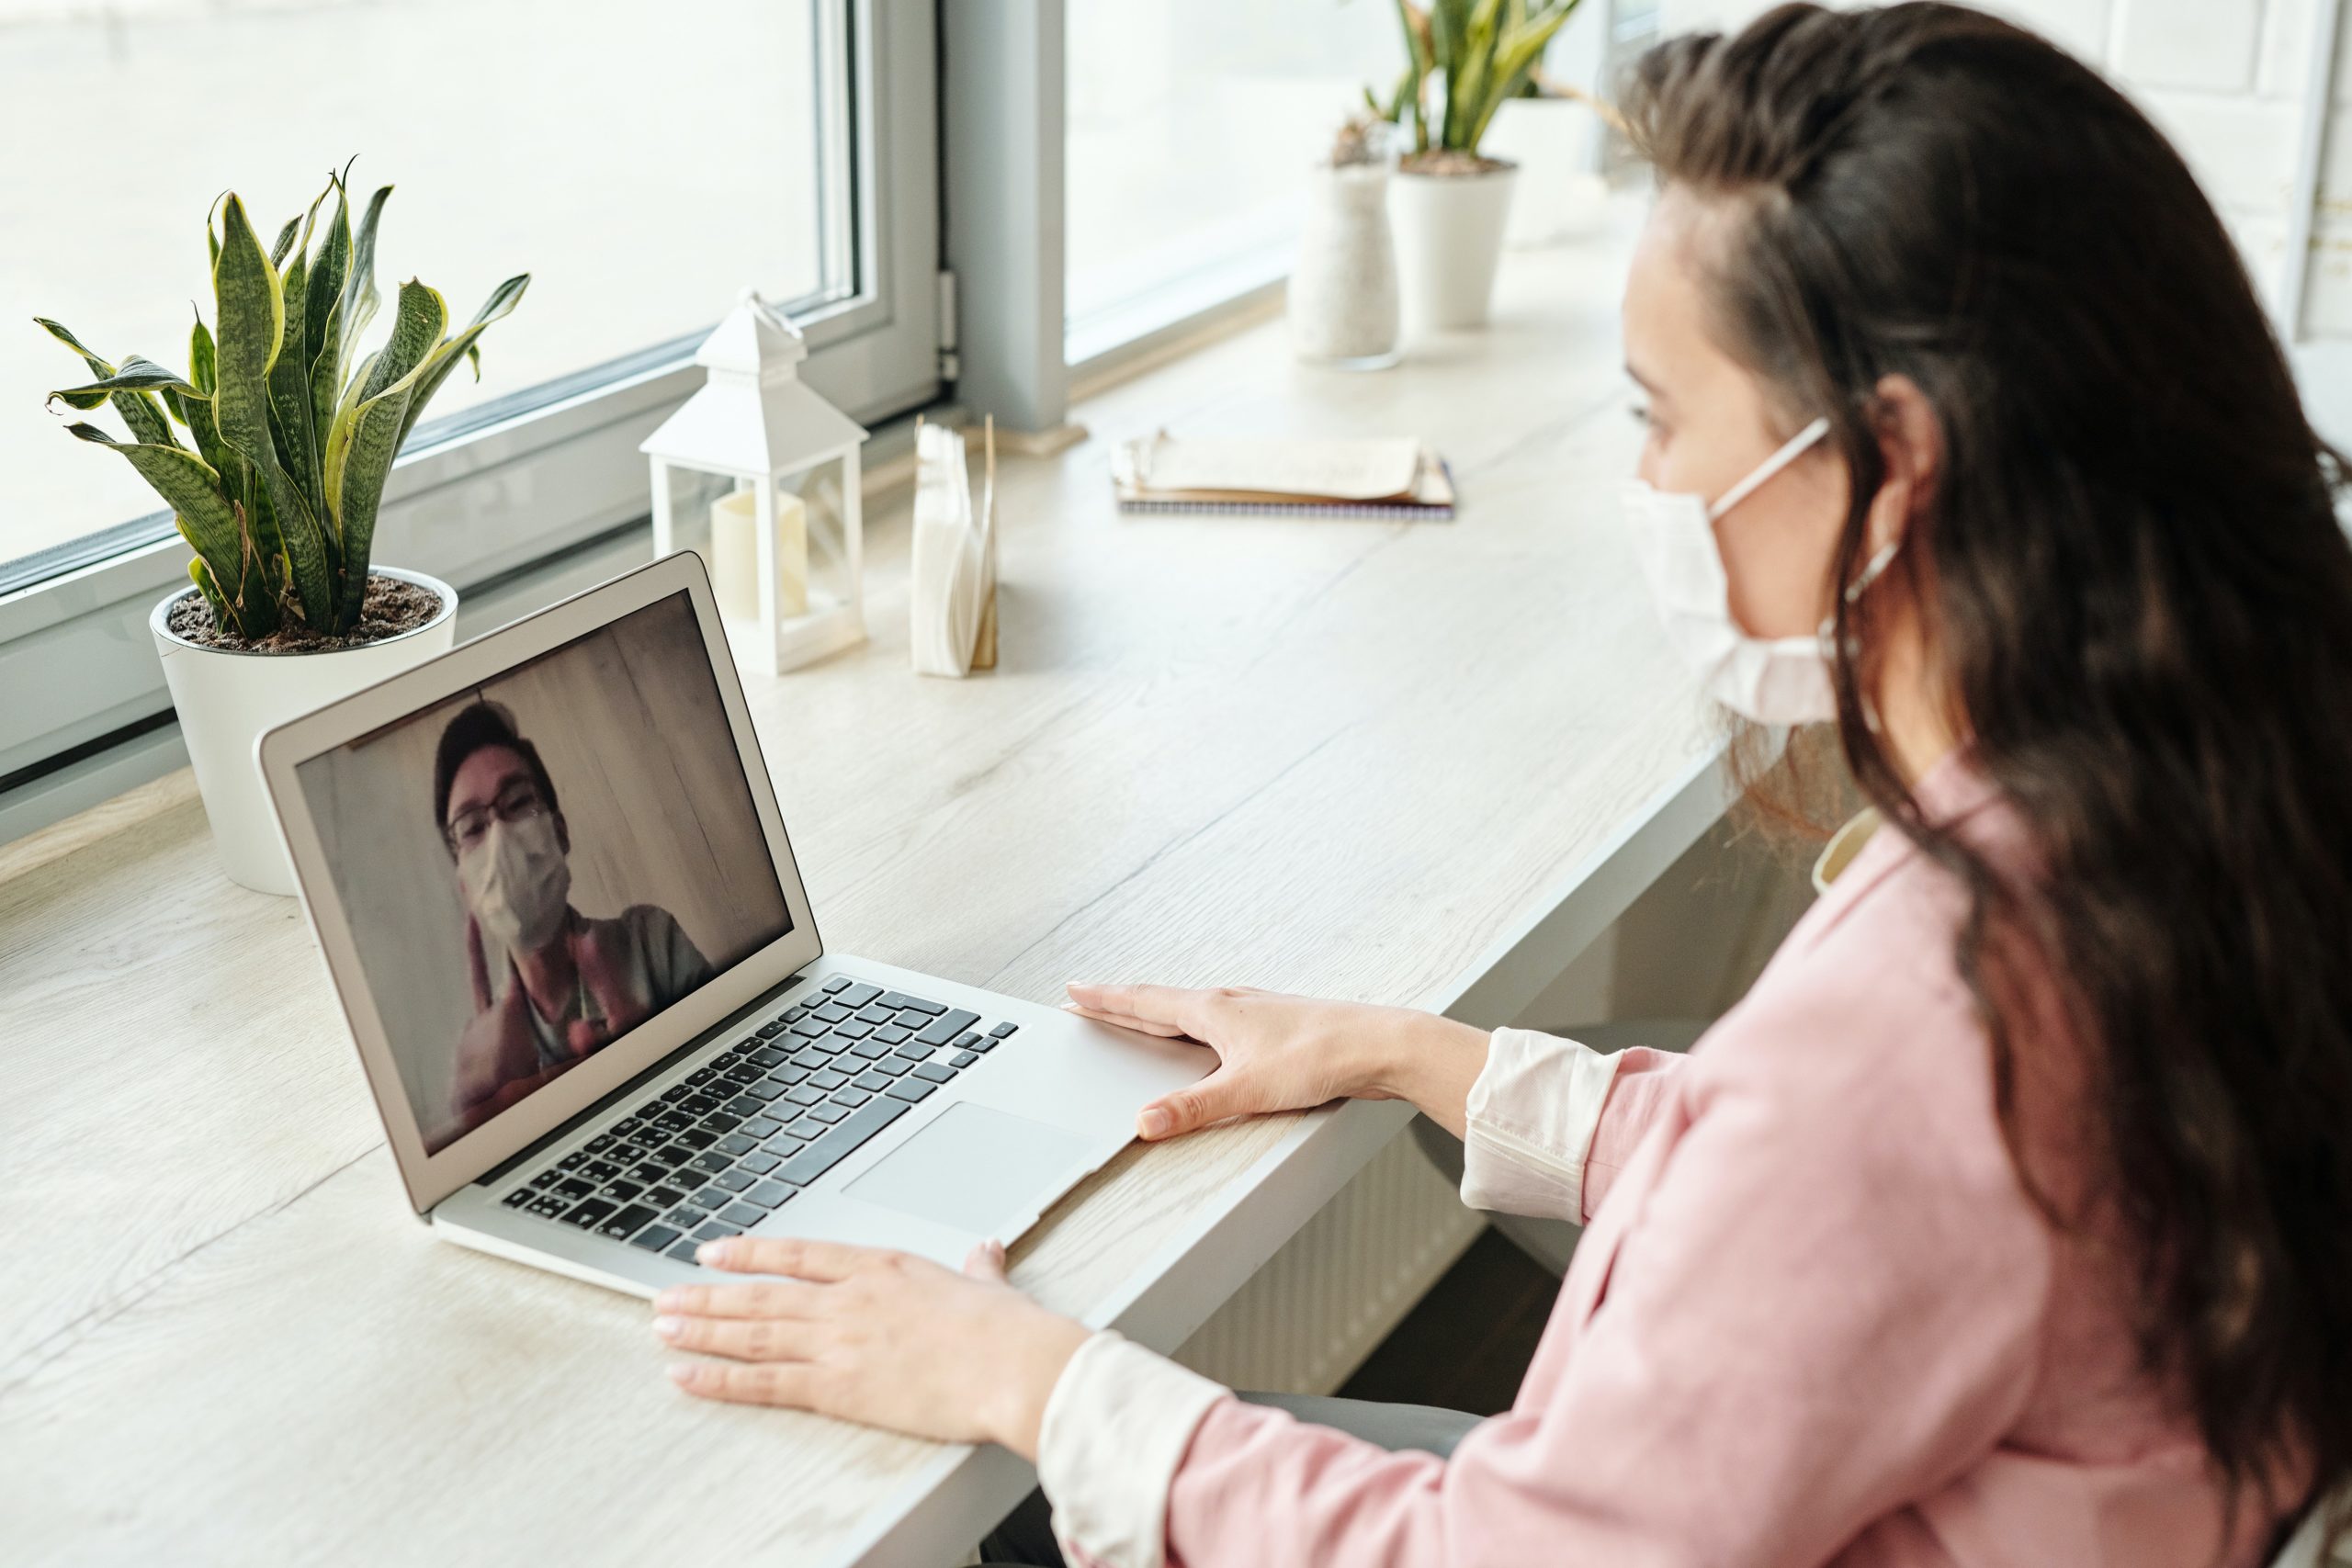 Two People on Video Call - Work From Home Communications Considerations